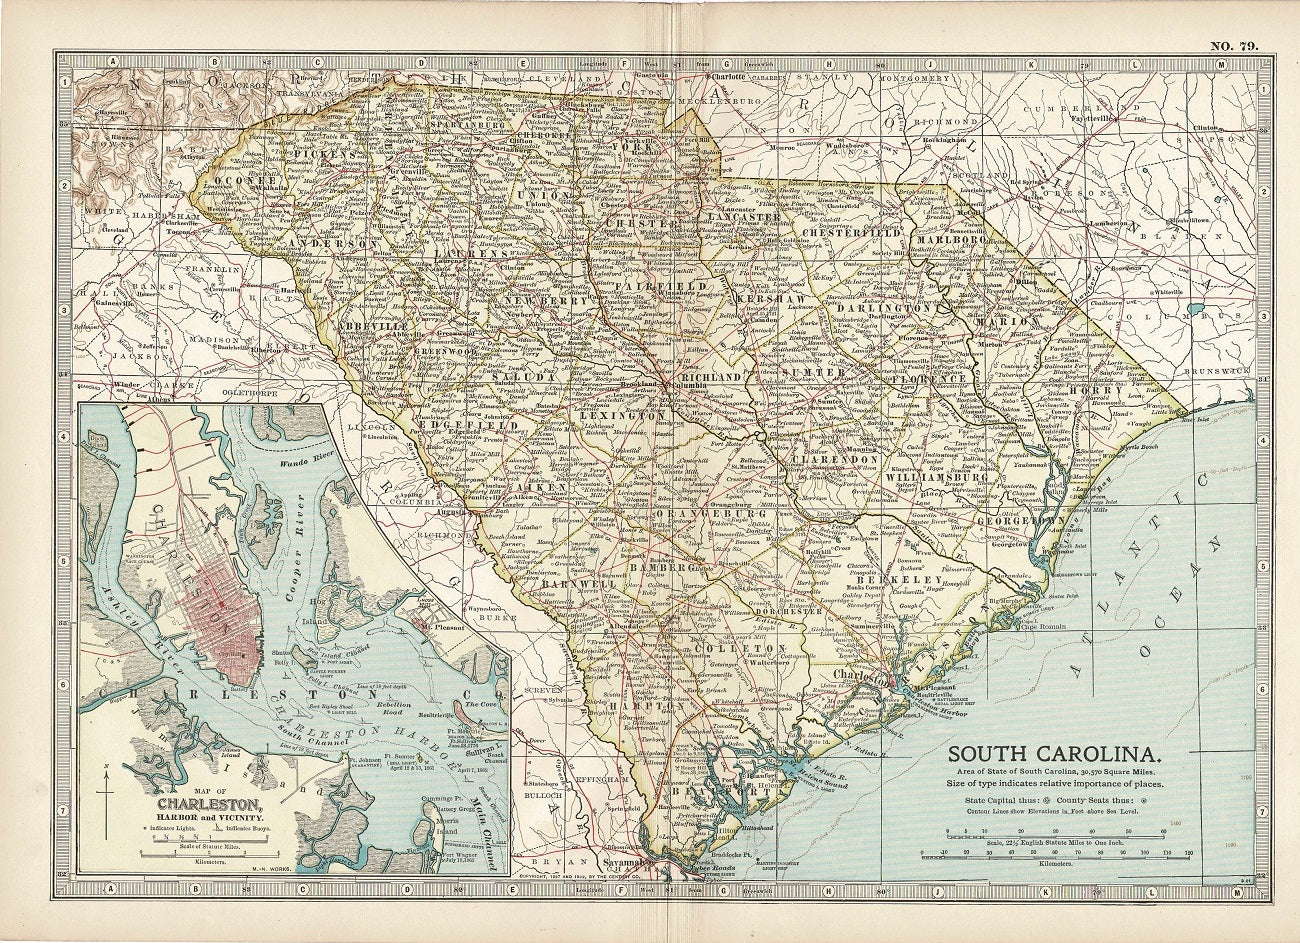 South Carolina Antique Map From Encyclopaedia Britannica Published 190